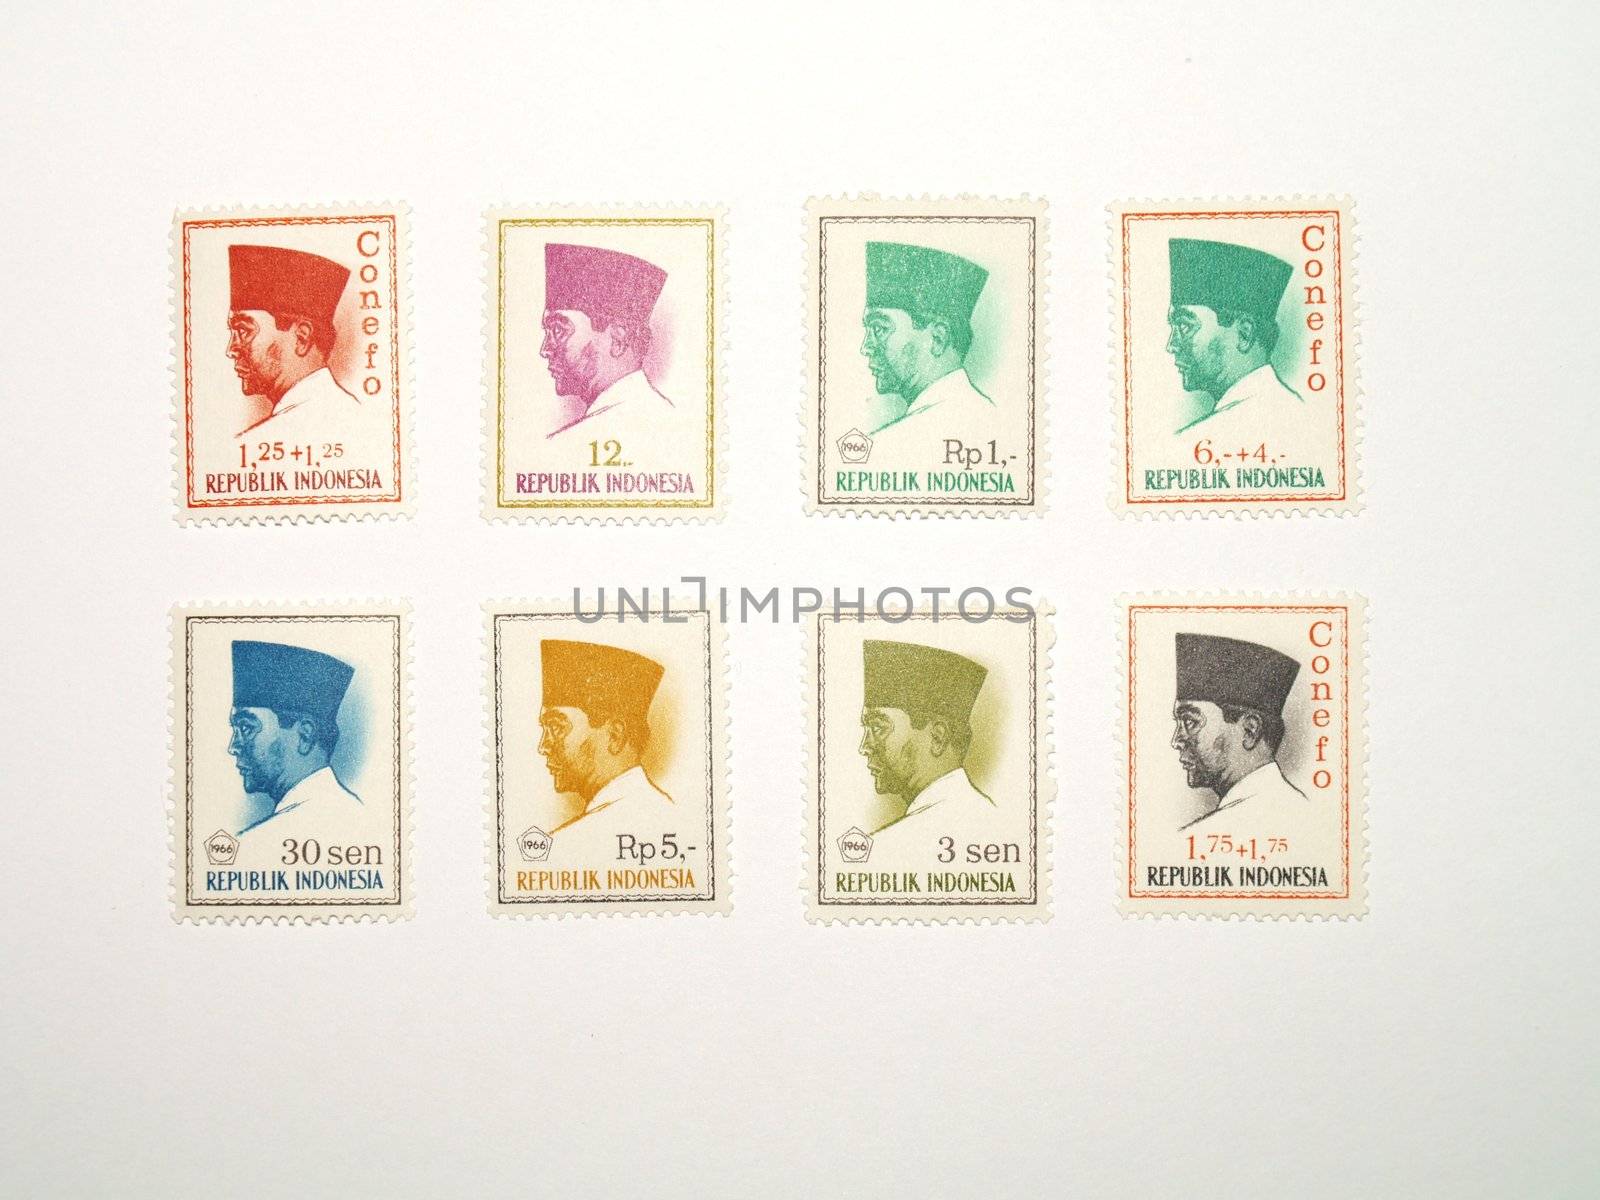 indonesian stamps by viviolsen